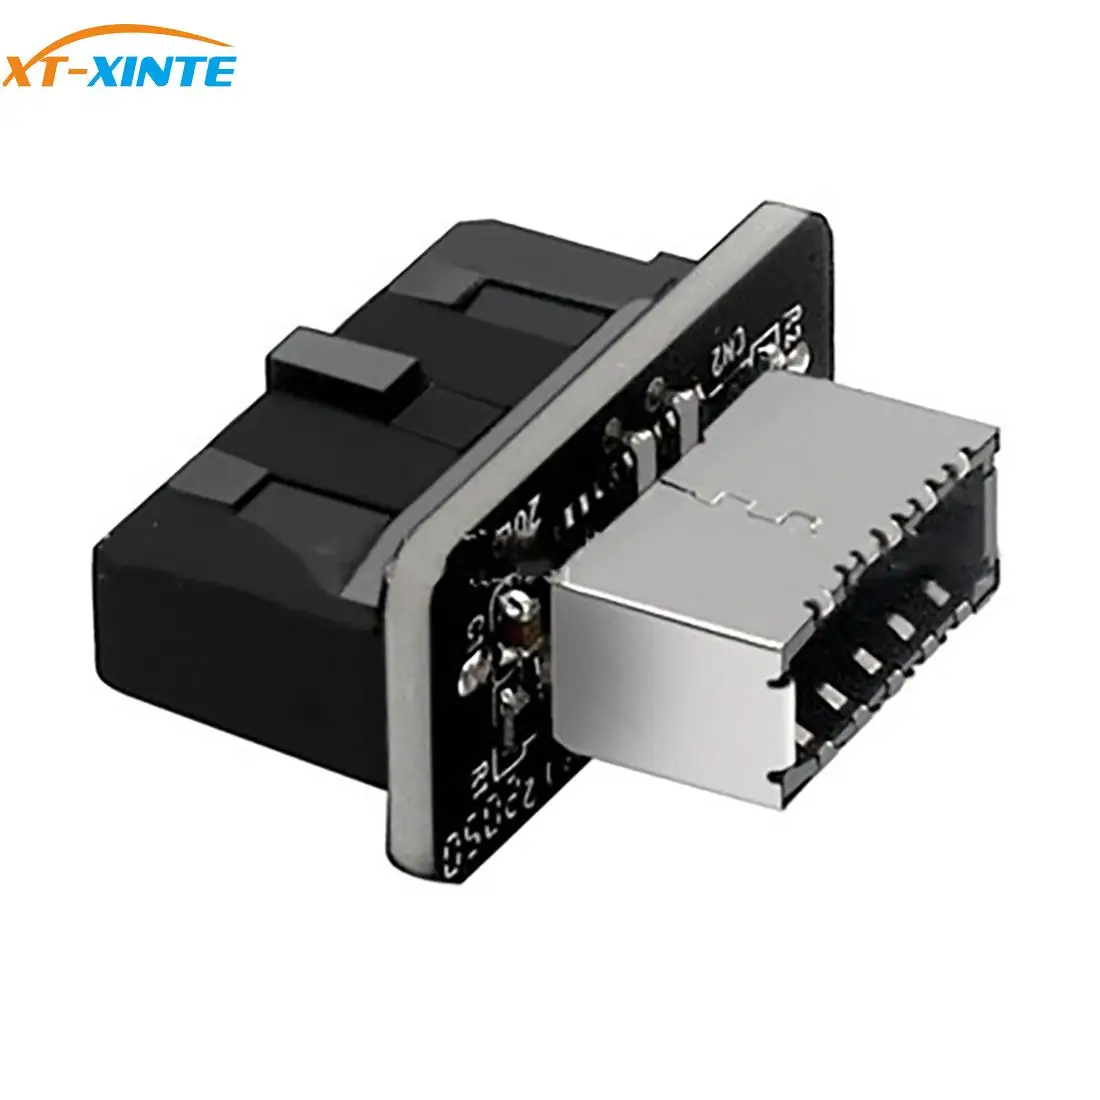 

USB Header Adapter USB3.0 19P/20P to TYPE-E 90 Degree Converter Chassis Front TYPE C Plug-in Port for Computer Motherboard